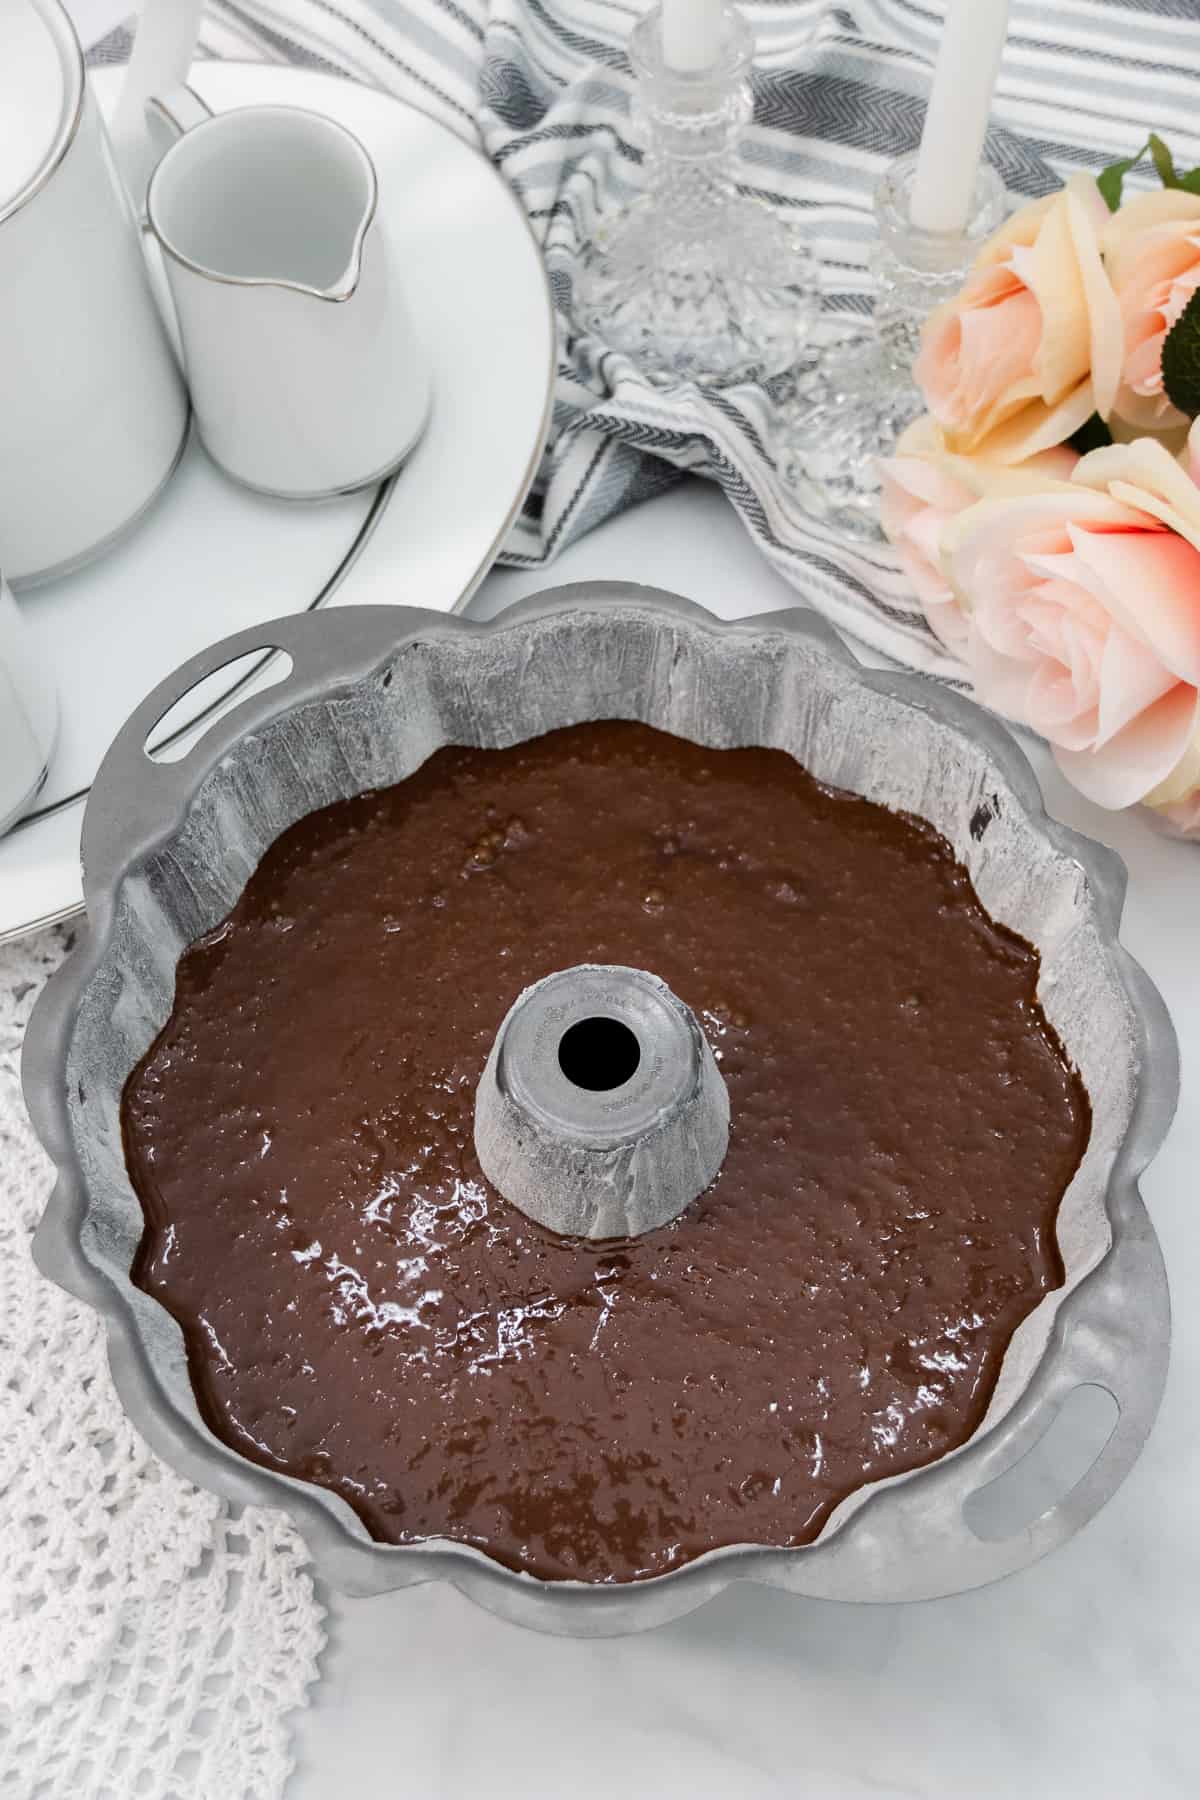 Chocolate pound cake batter poured into a large bundt pan.